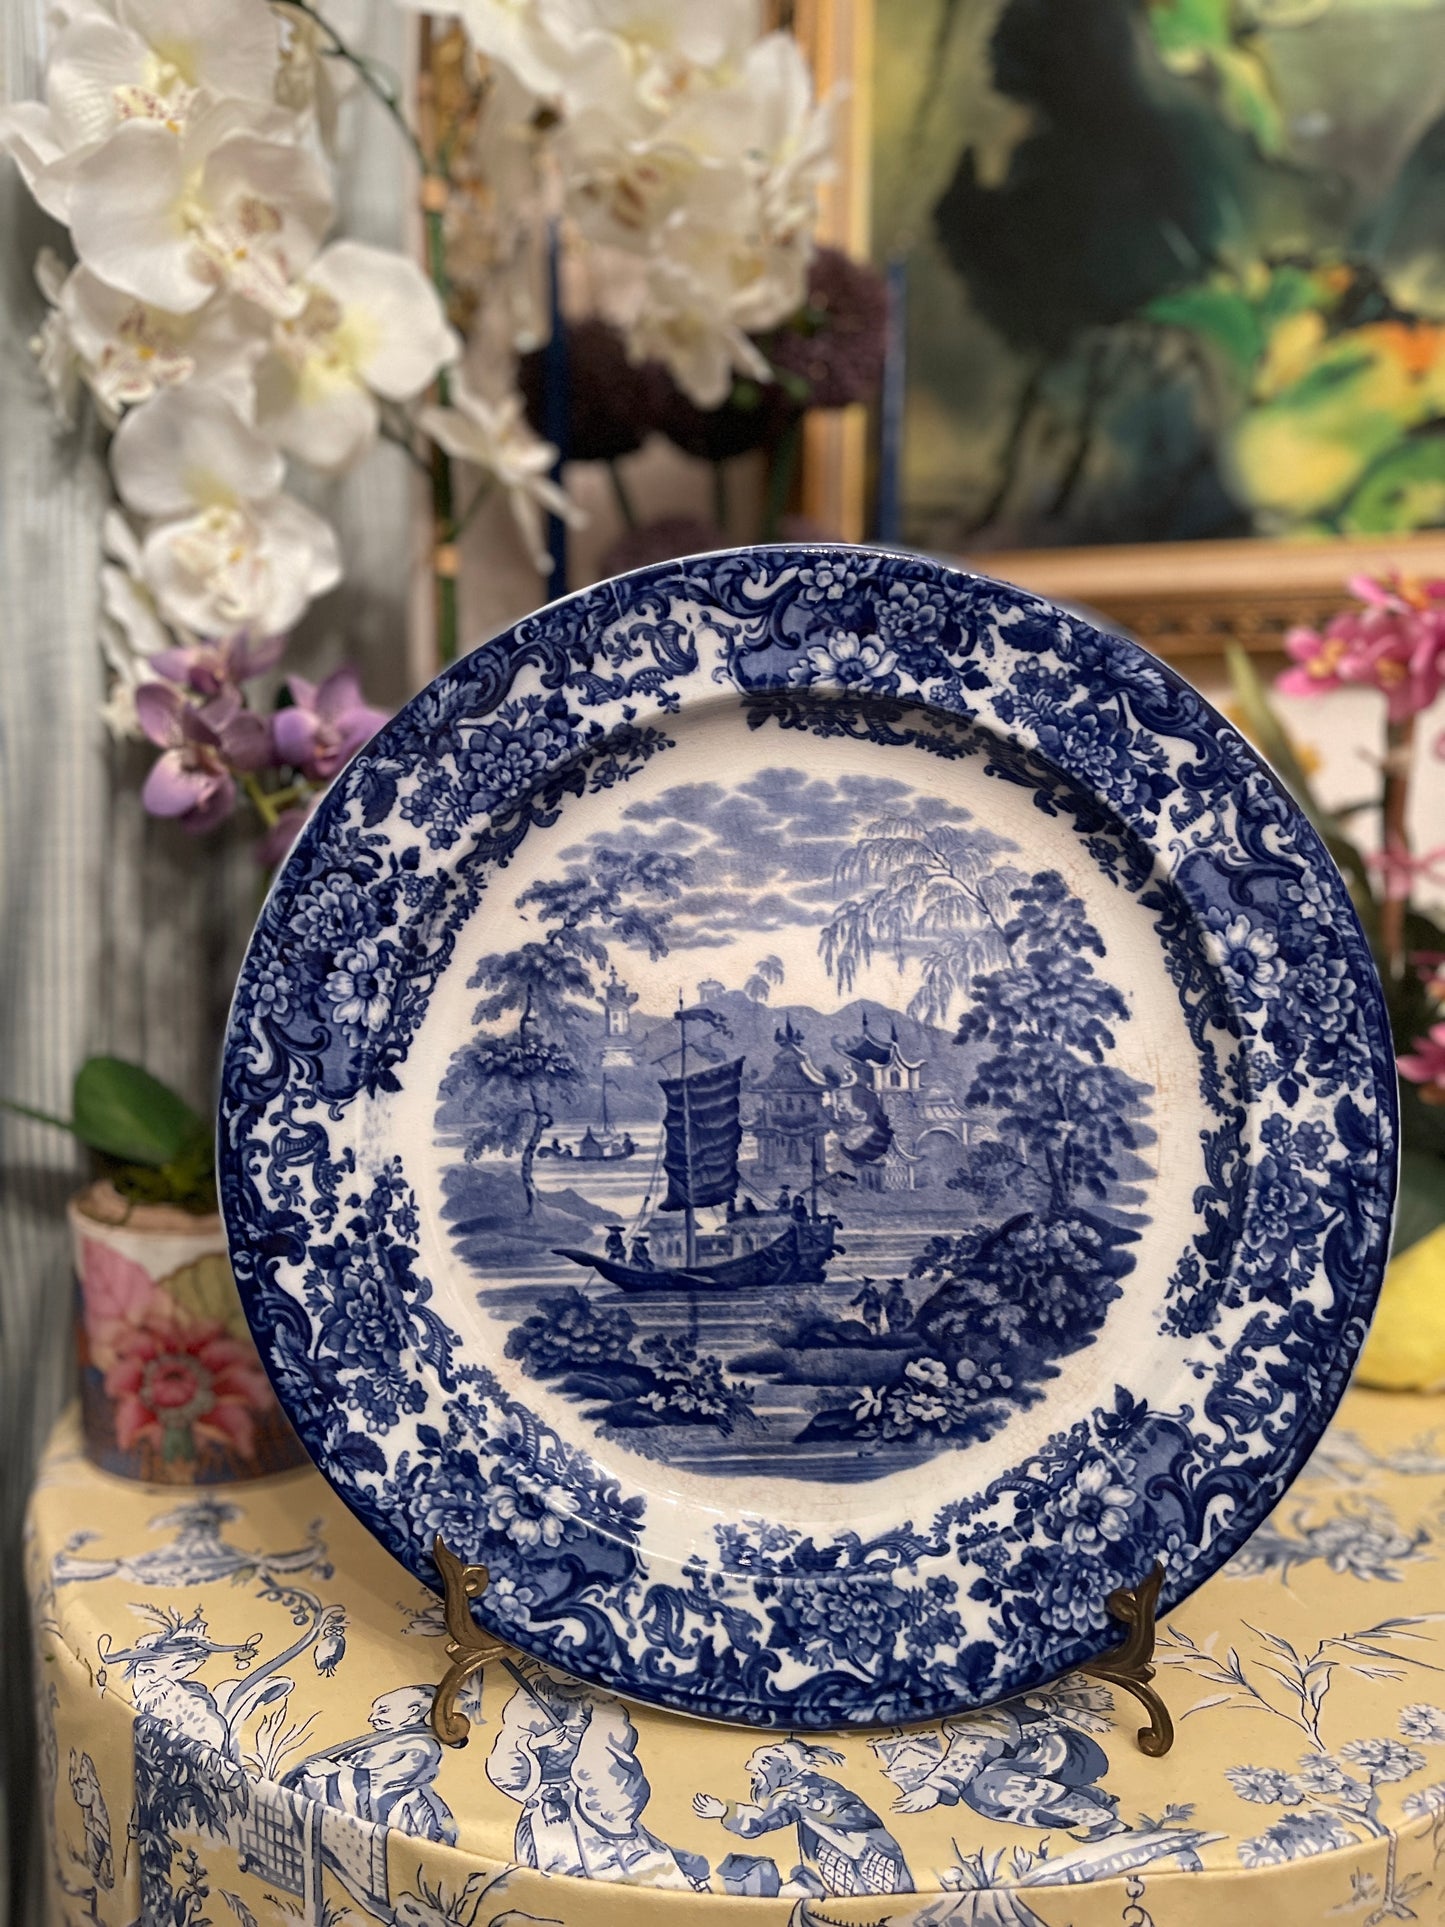 Large Antique Chinoiserie Wedgwood Platter, Blue and White